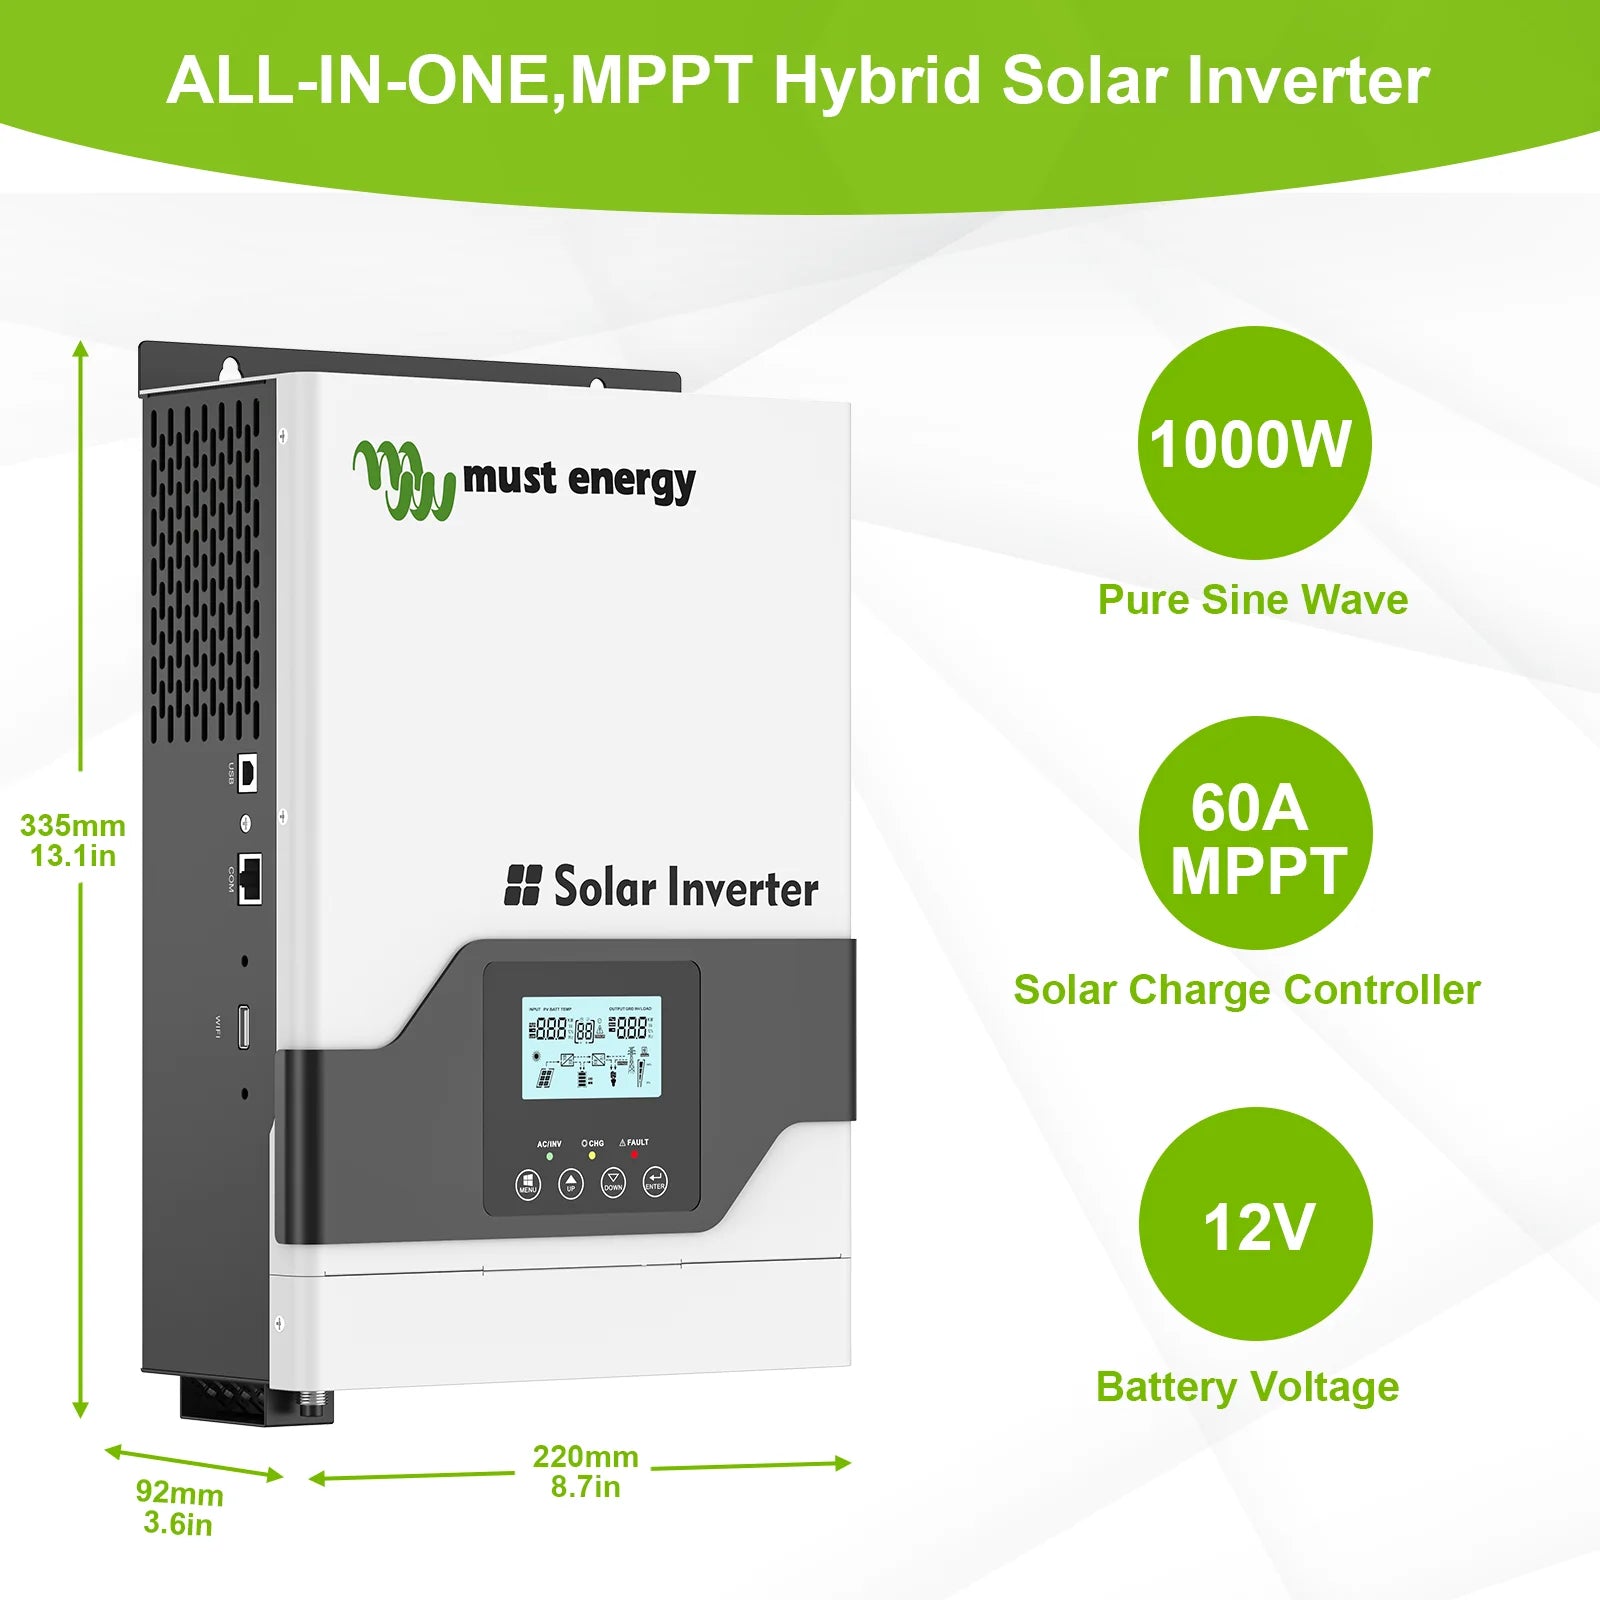 Compact hybrid inverter for solar power systems, measuring 13.1 inches long, supports up to 1000W.